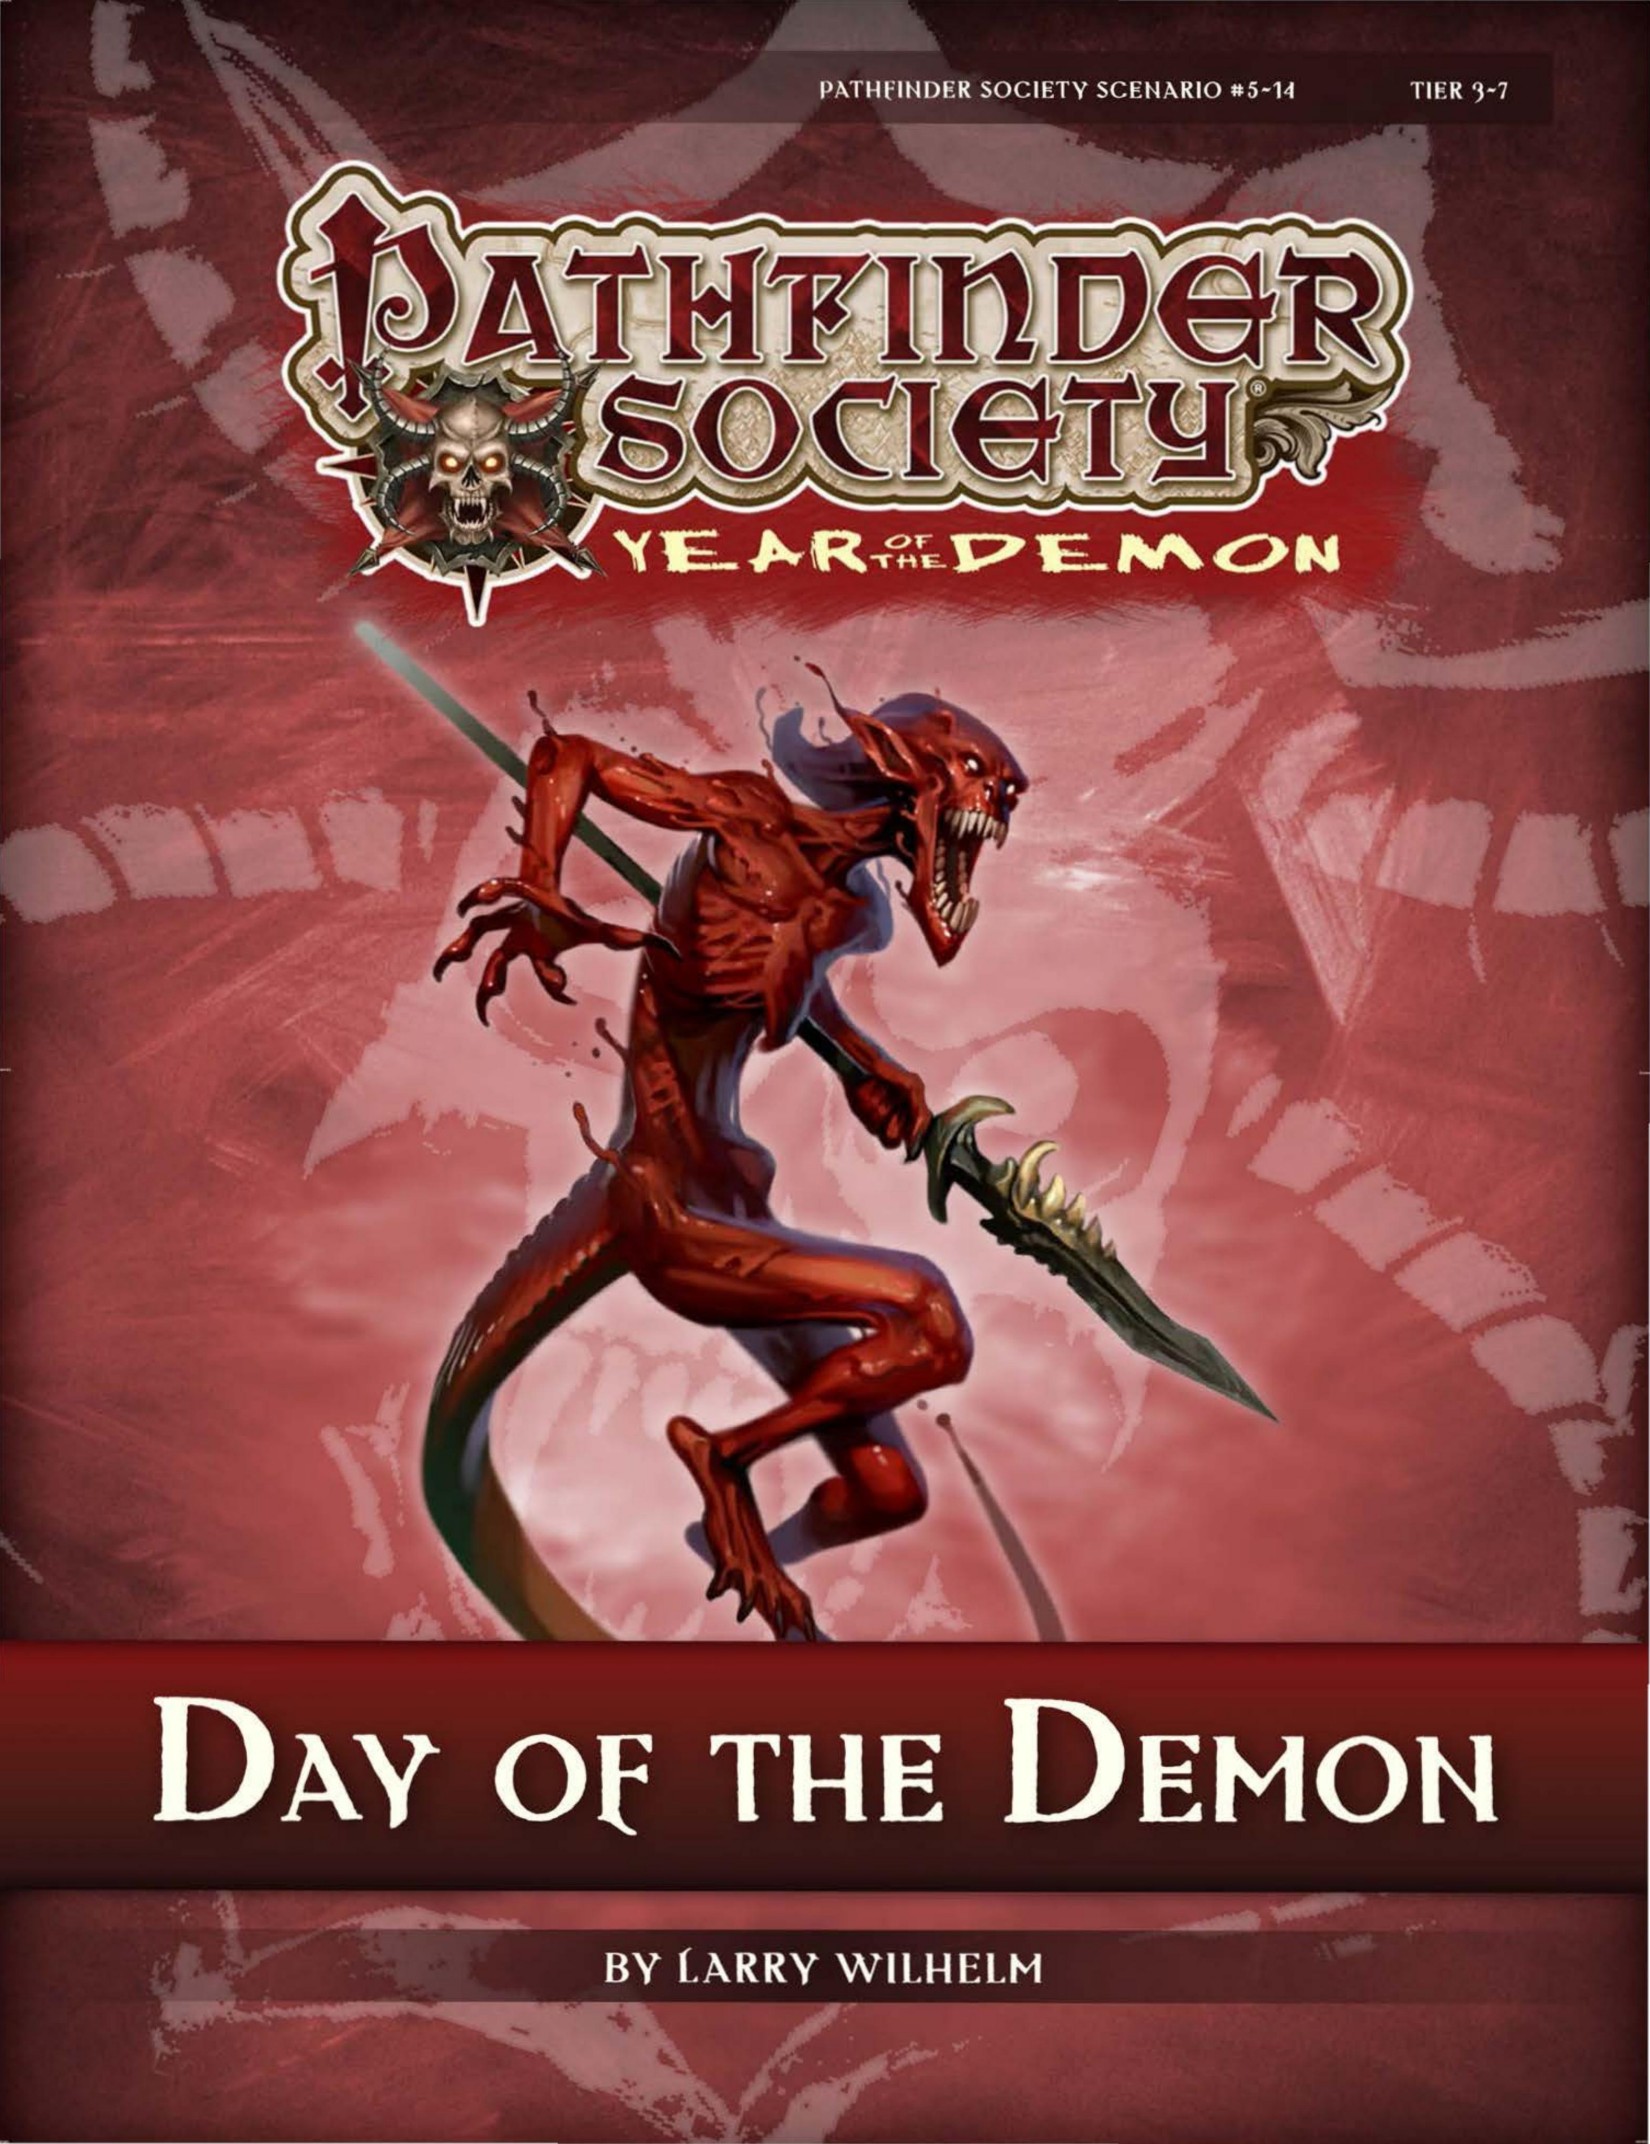 S05-14 Day of the Demon